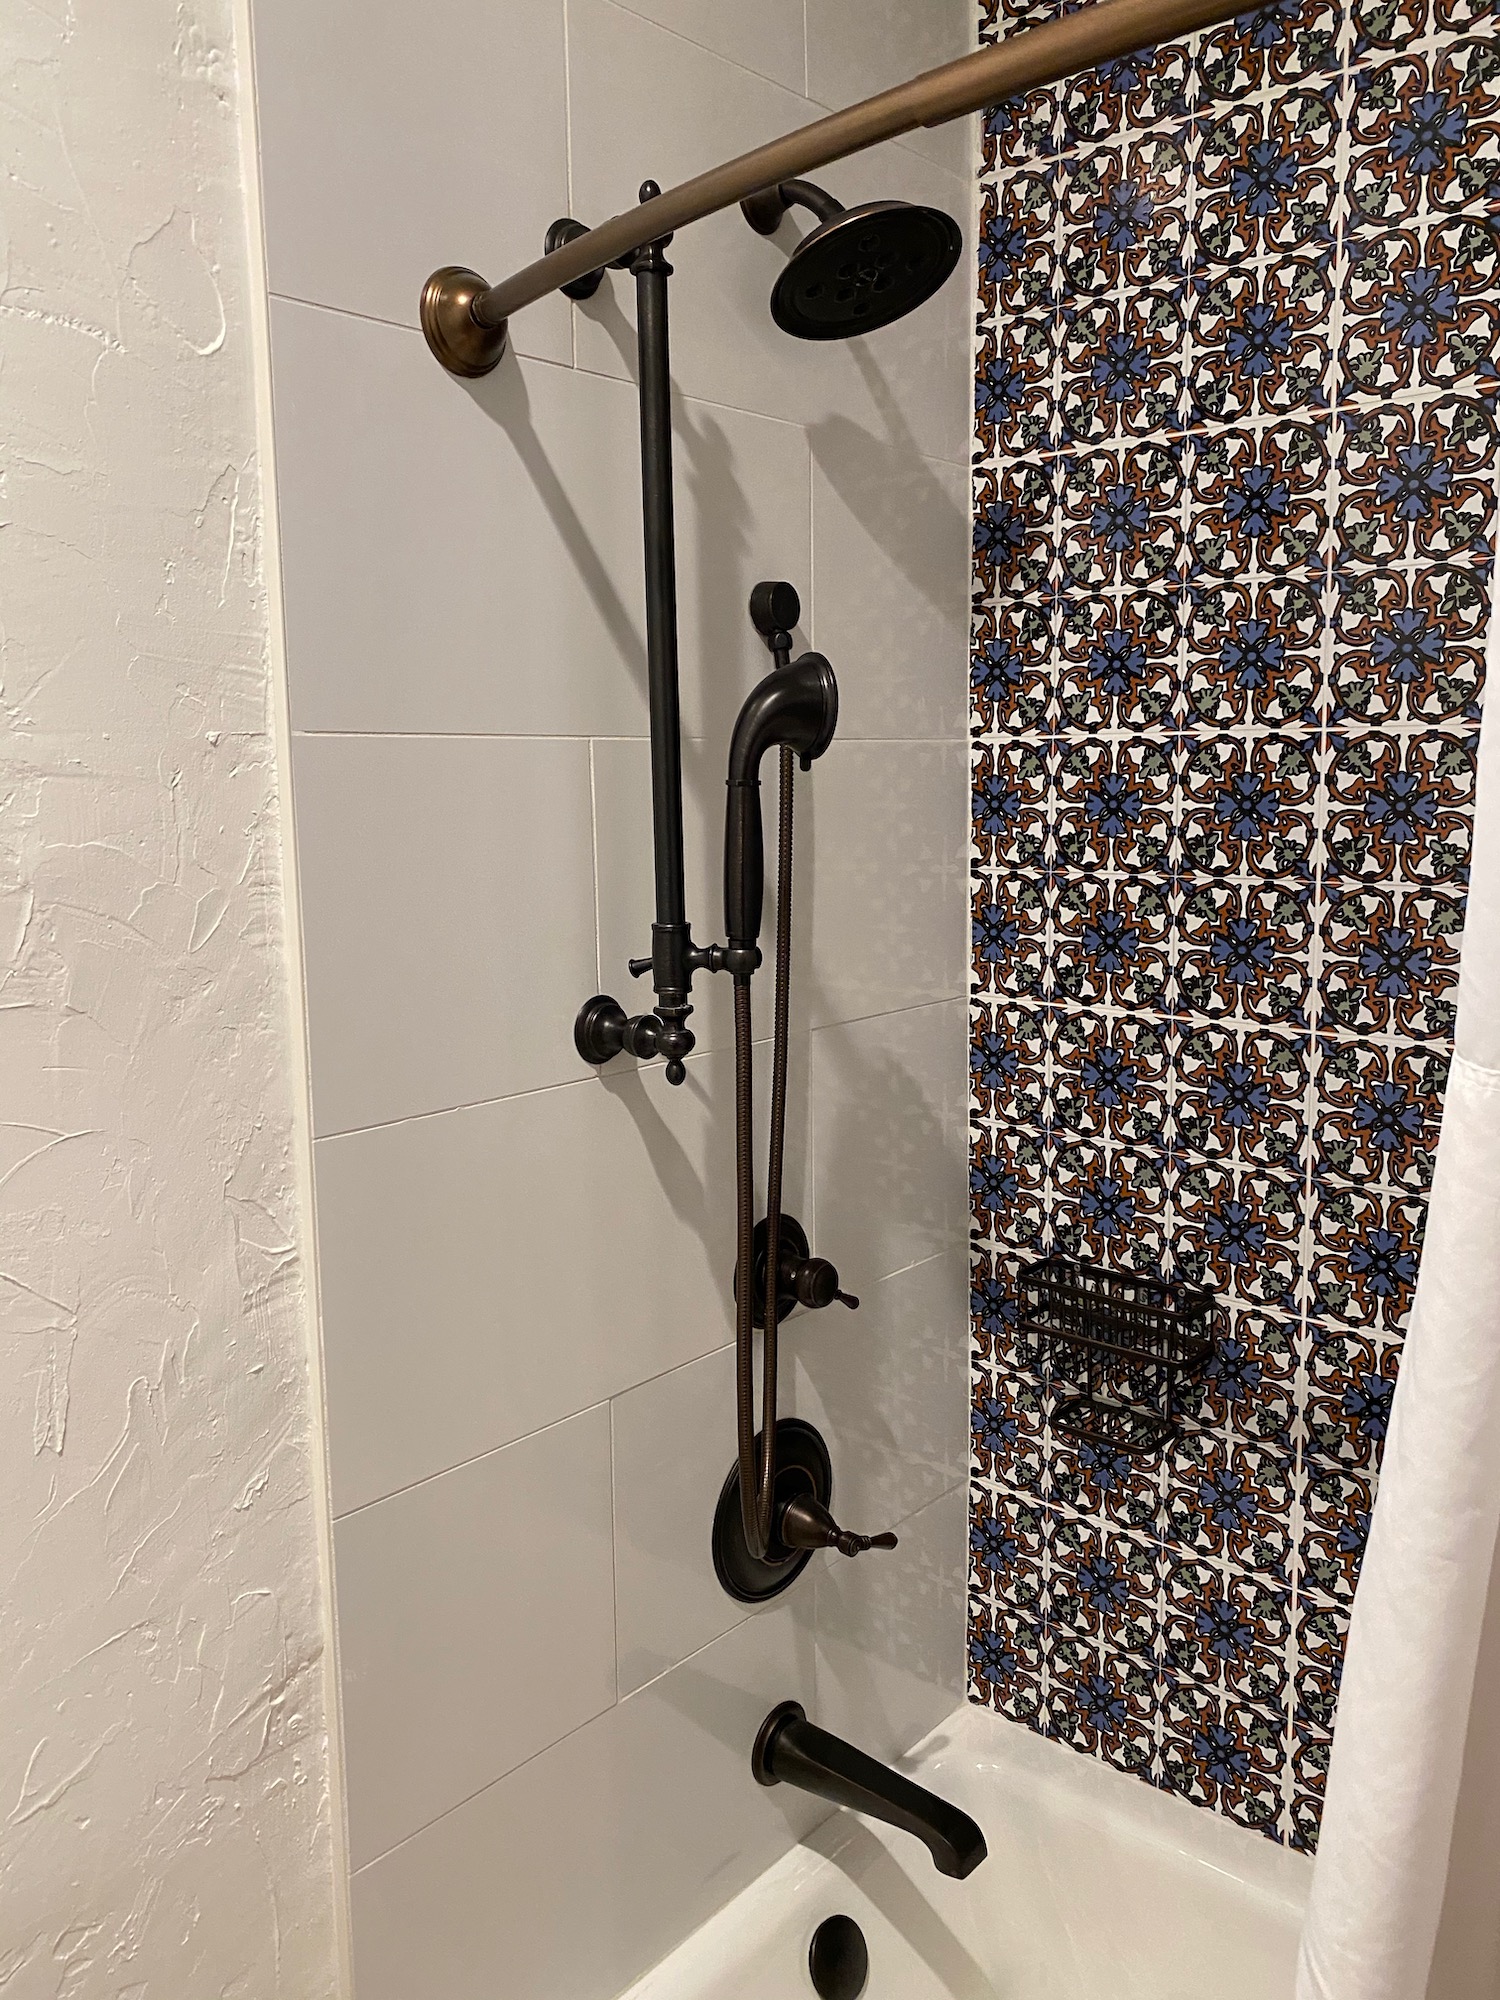 a shower head and faucet